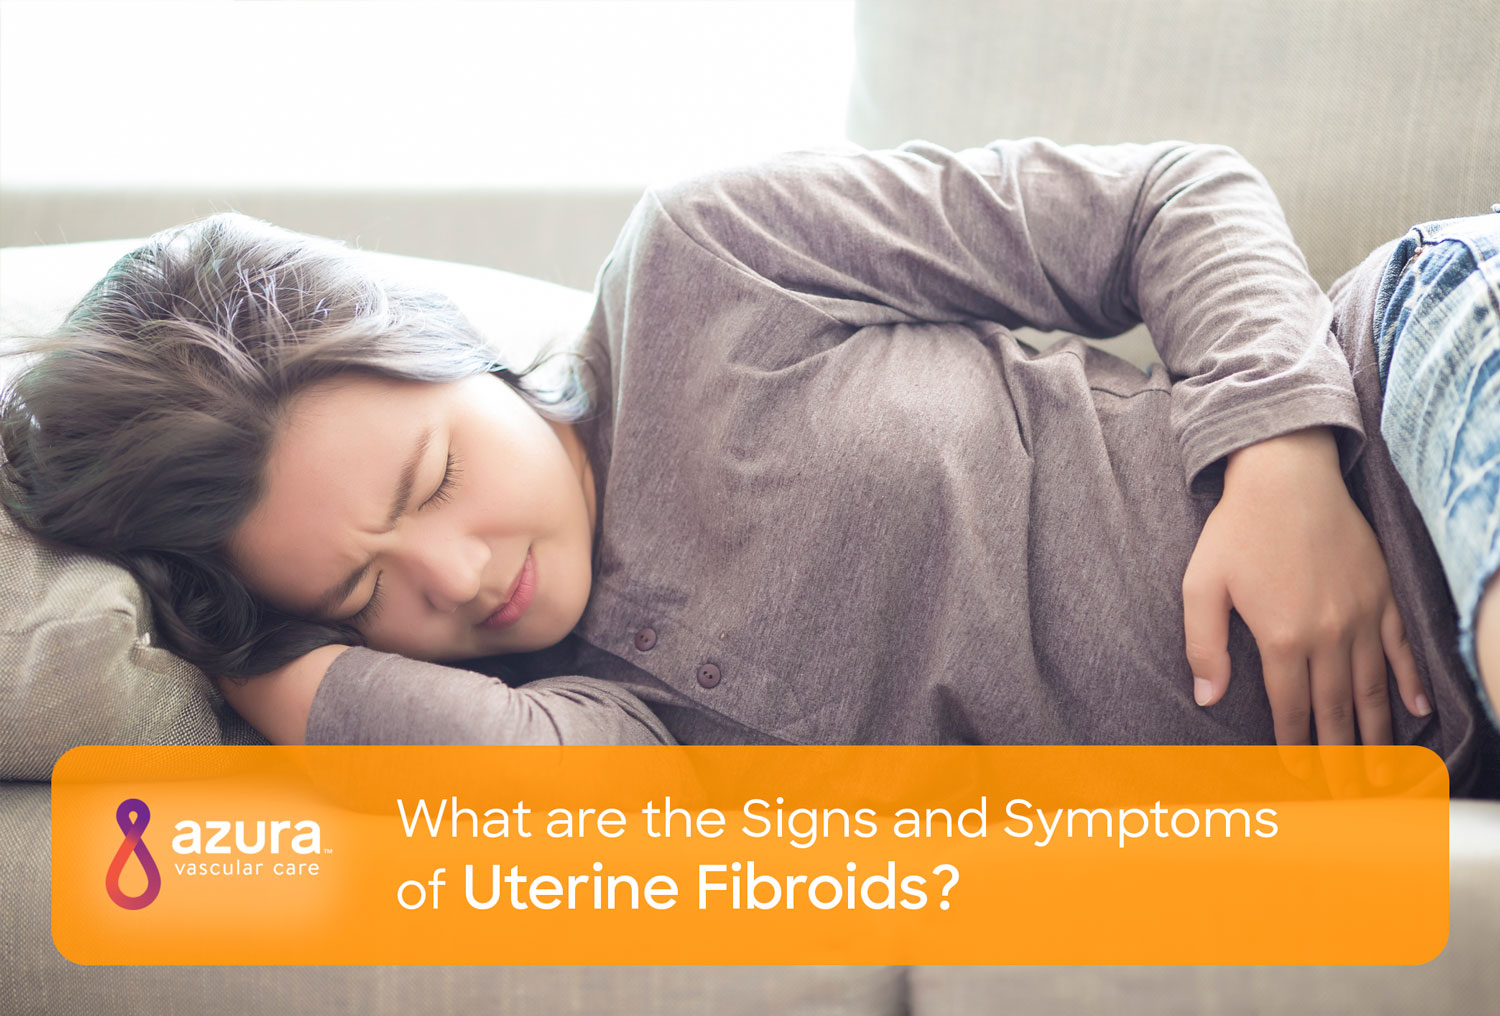 Know the Signs and Symptoms of Uterine Fibroids